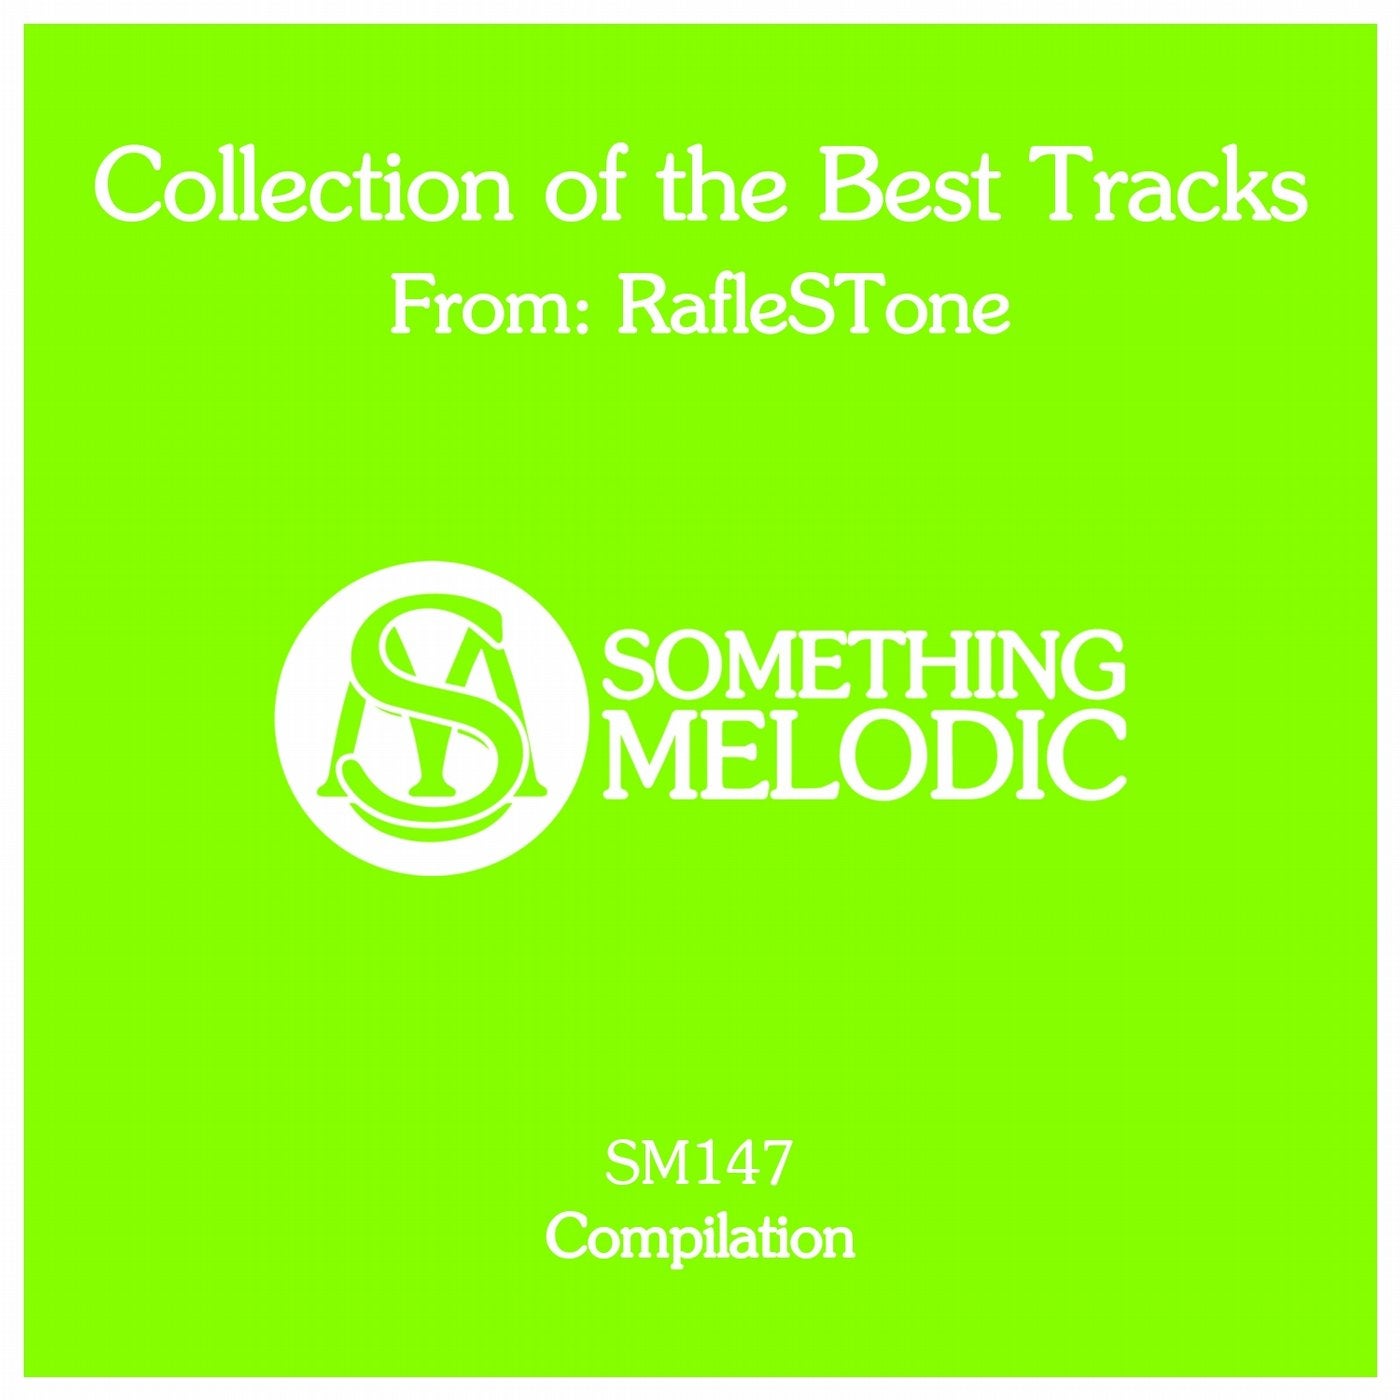 Collection of the Best Tracks From: Raflestone